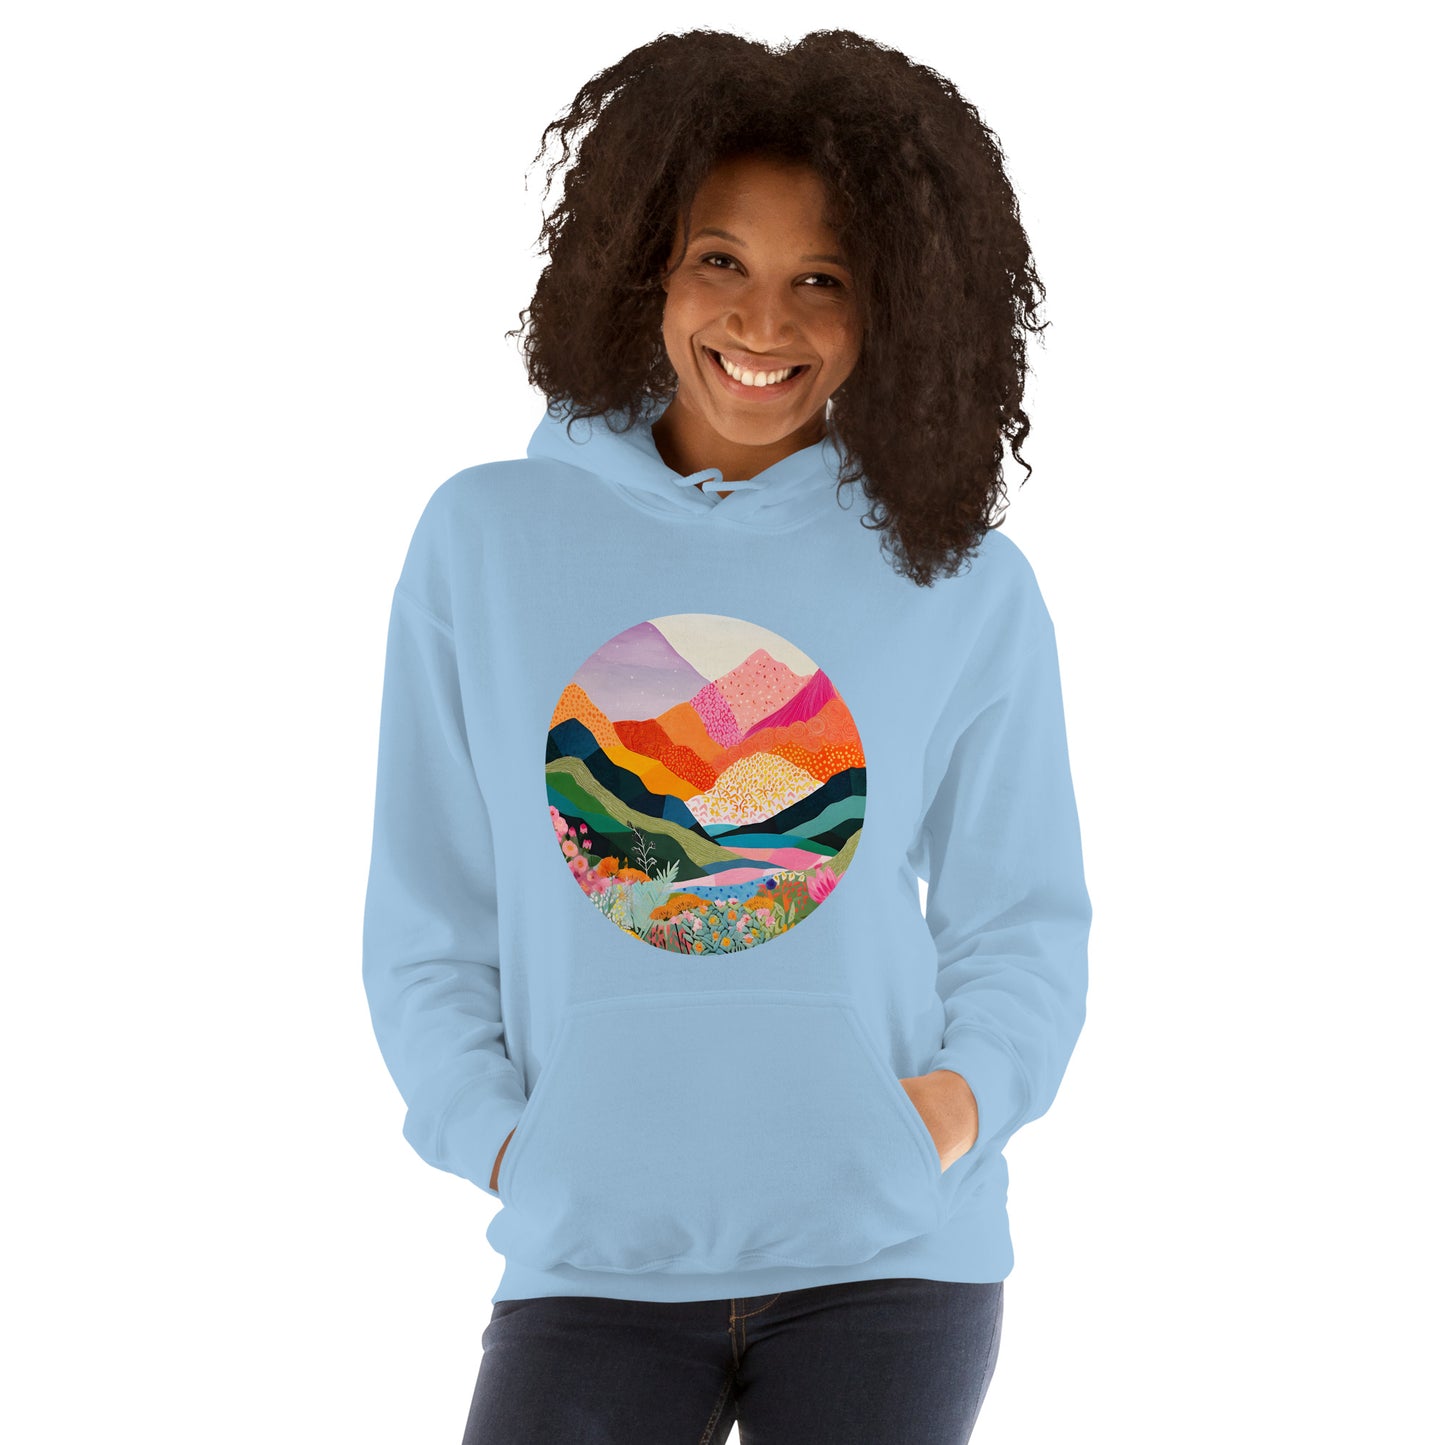 Landscape, Nature, Vibrant colors, Colorful, Mountains, Flowers, Colors, Painting, Tranquil, Art, Scenery, Beautiful, Season, Unisex, Hoodie